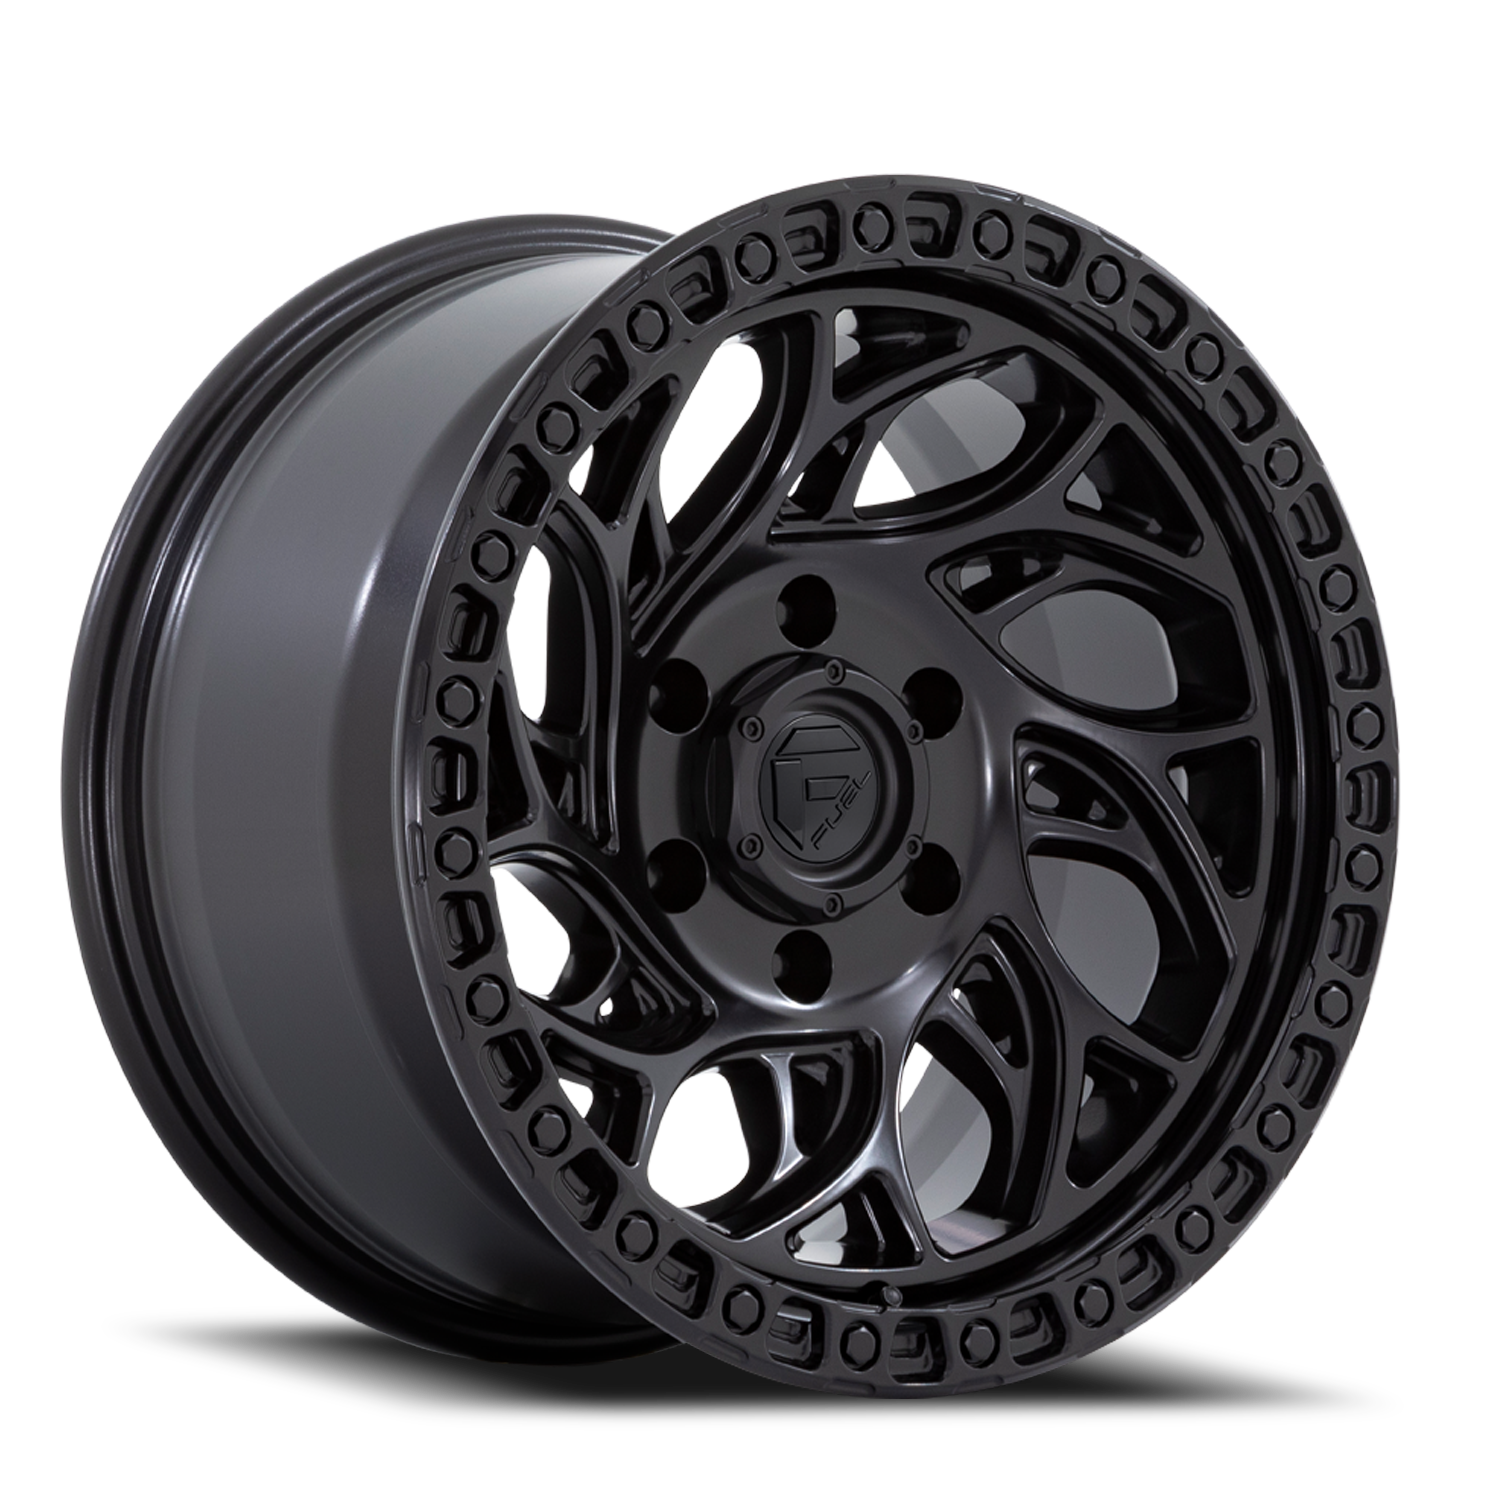 Aluminum Wheels 17X9 Runner OR D852 6 On 114.3 Blackout 66.06 Bore 1 Offset Fuel Off Road Wheels